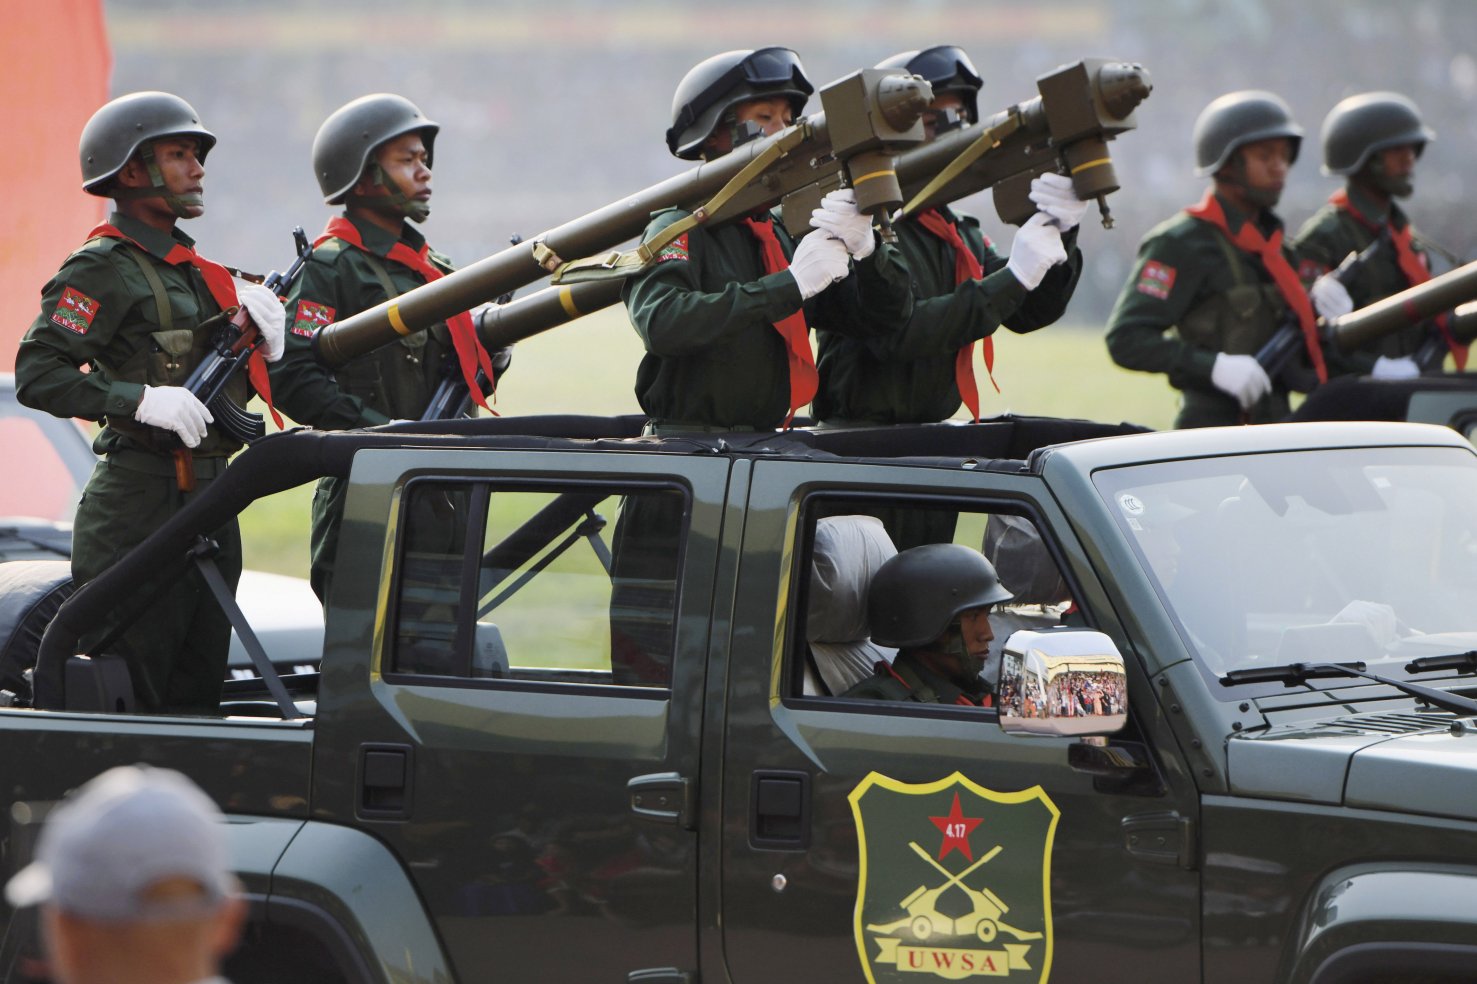 During a military parade held on 17 April the UWSA displayed Chinese-made equipment, including FN-6 MANPADSs. (Ye Aung Thu/AFP/Getty Images)